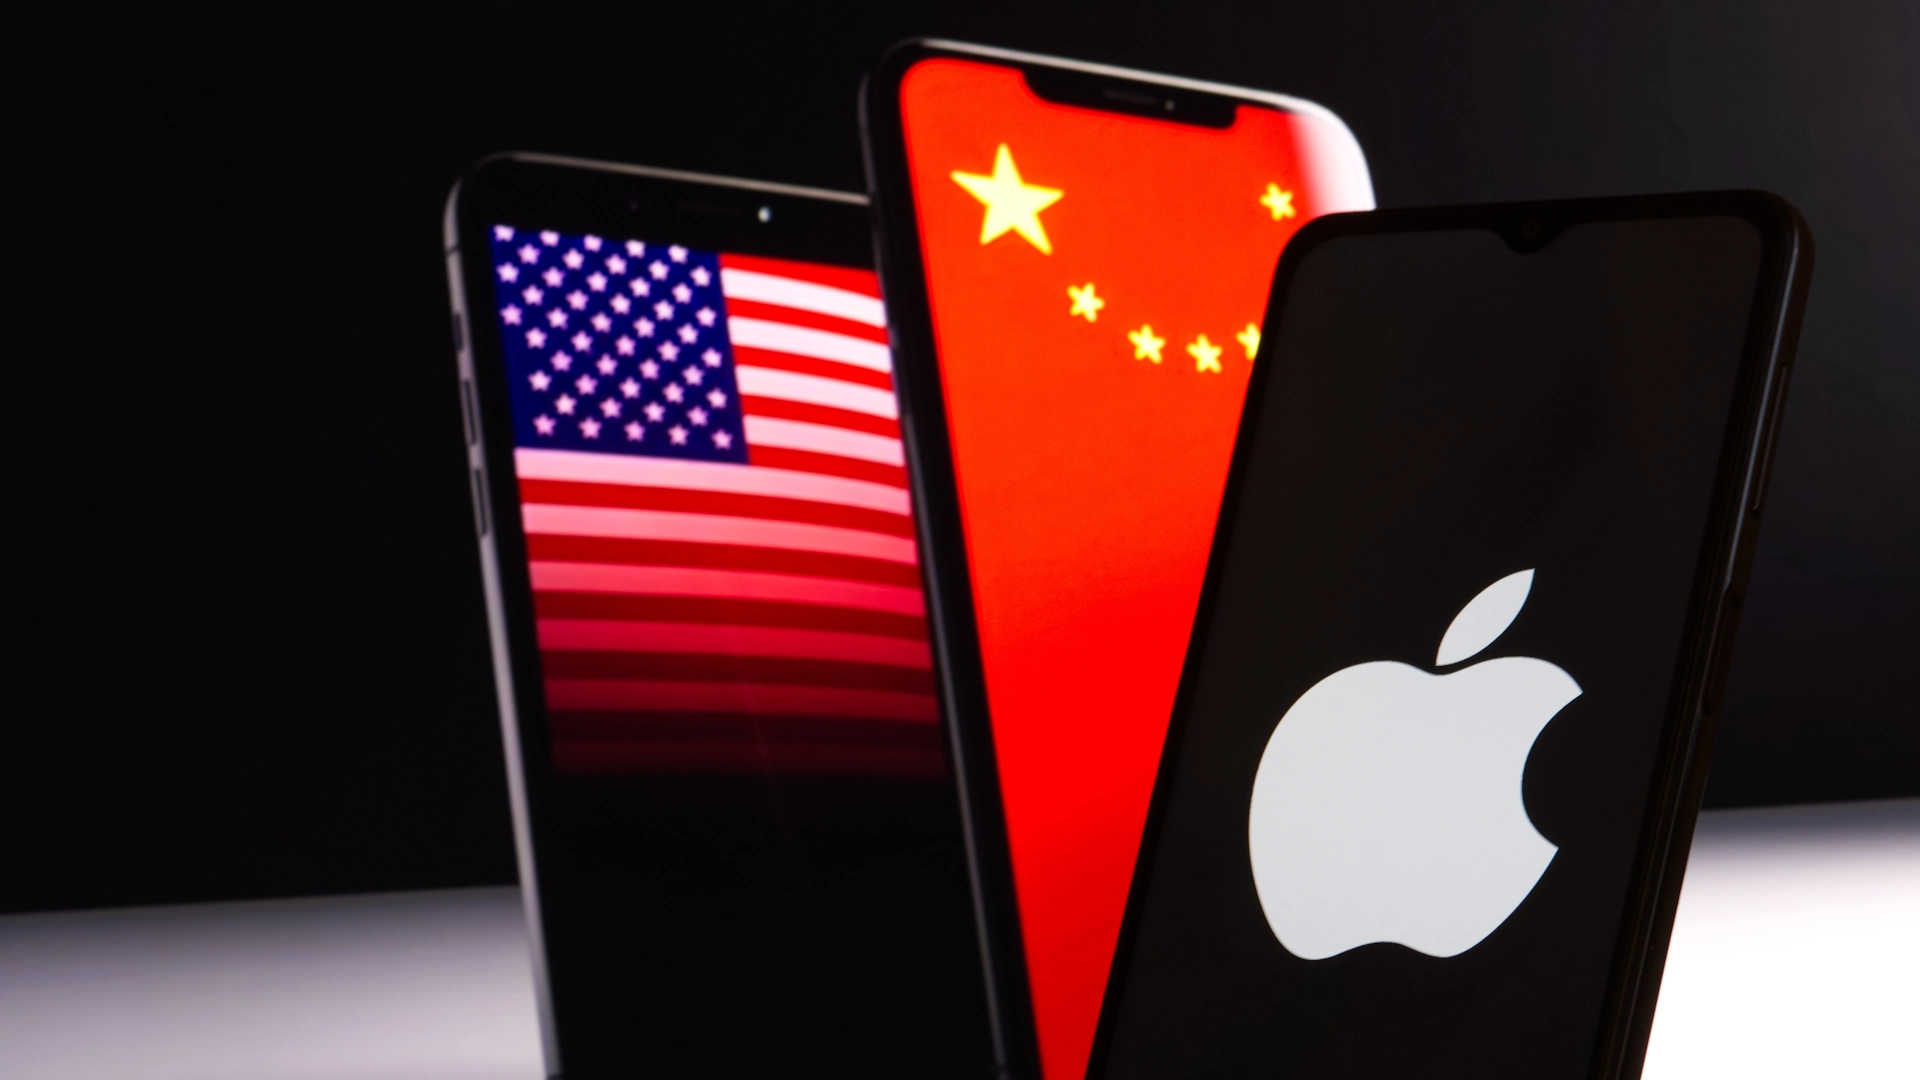 Huawei overthrew Apple from the top spot in the smartphone market in China